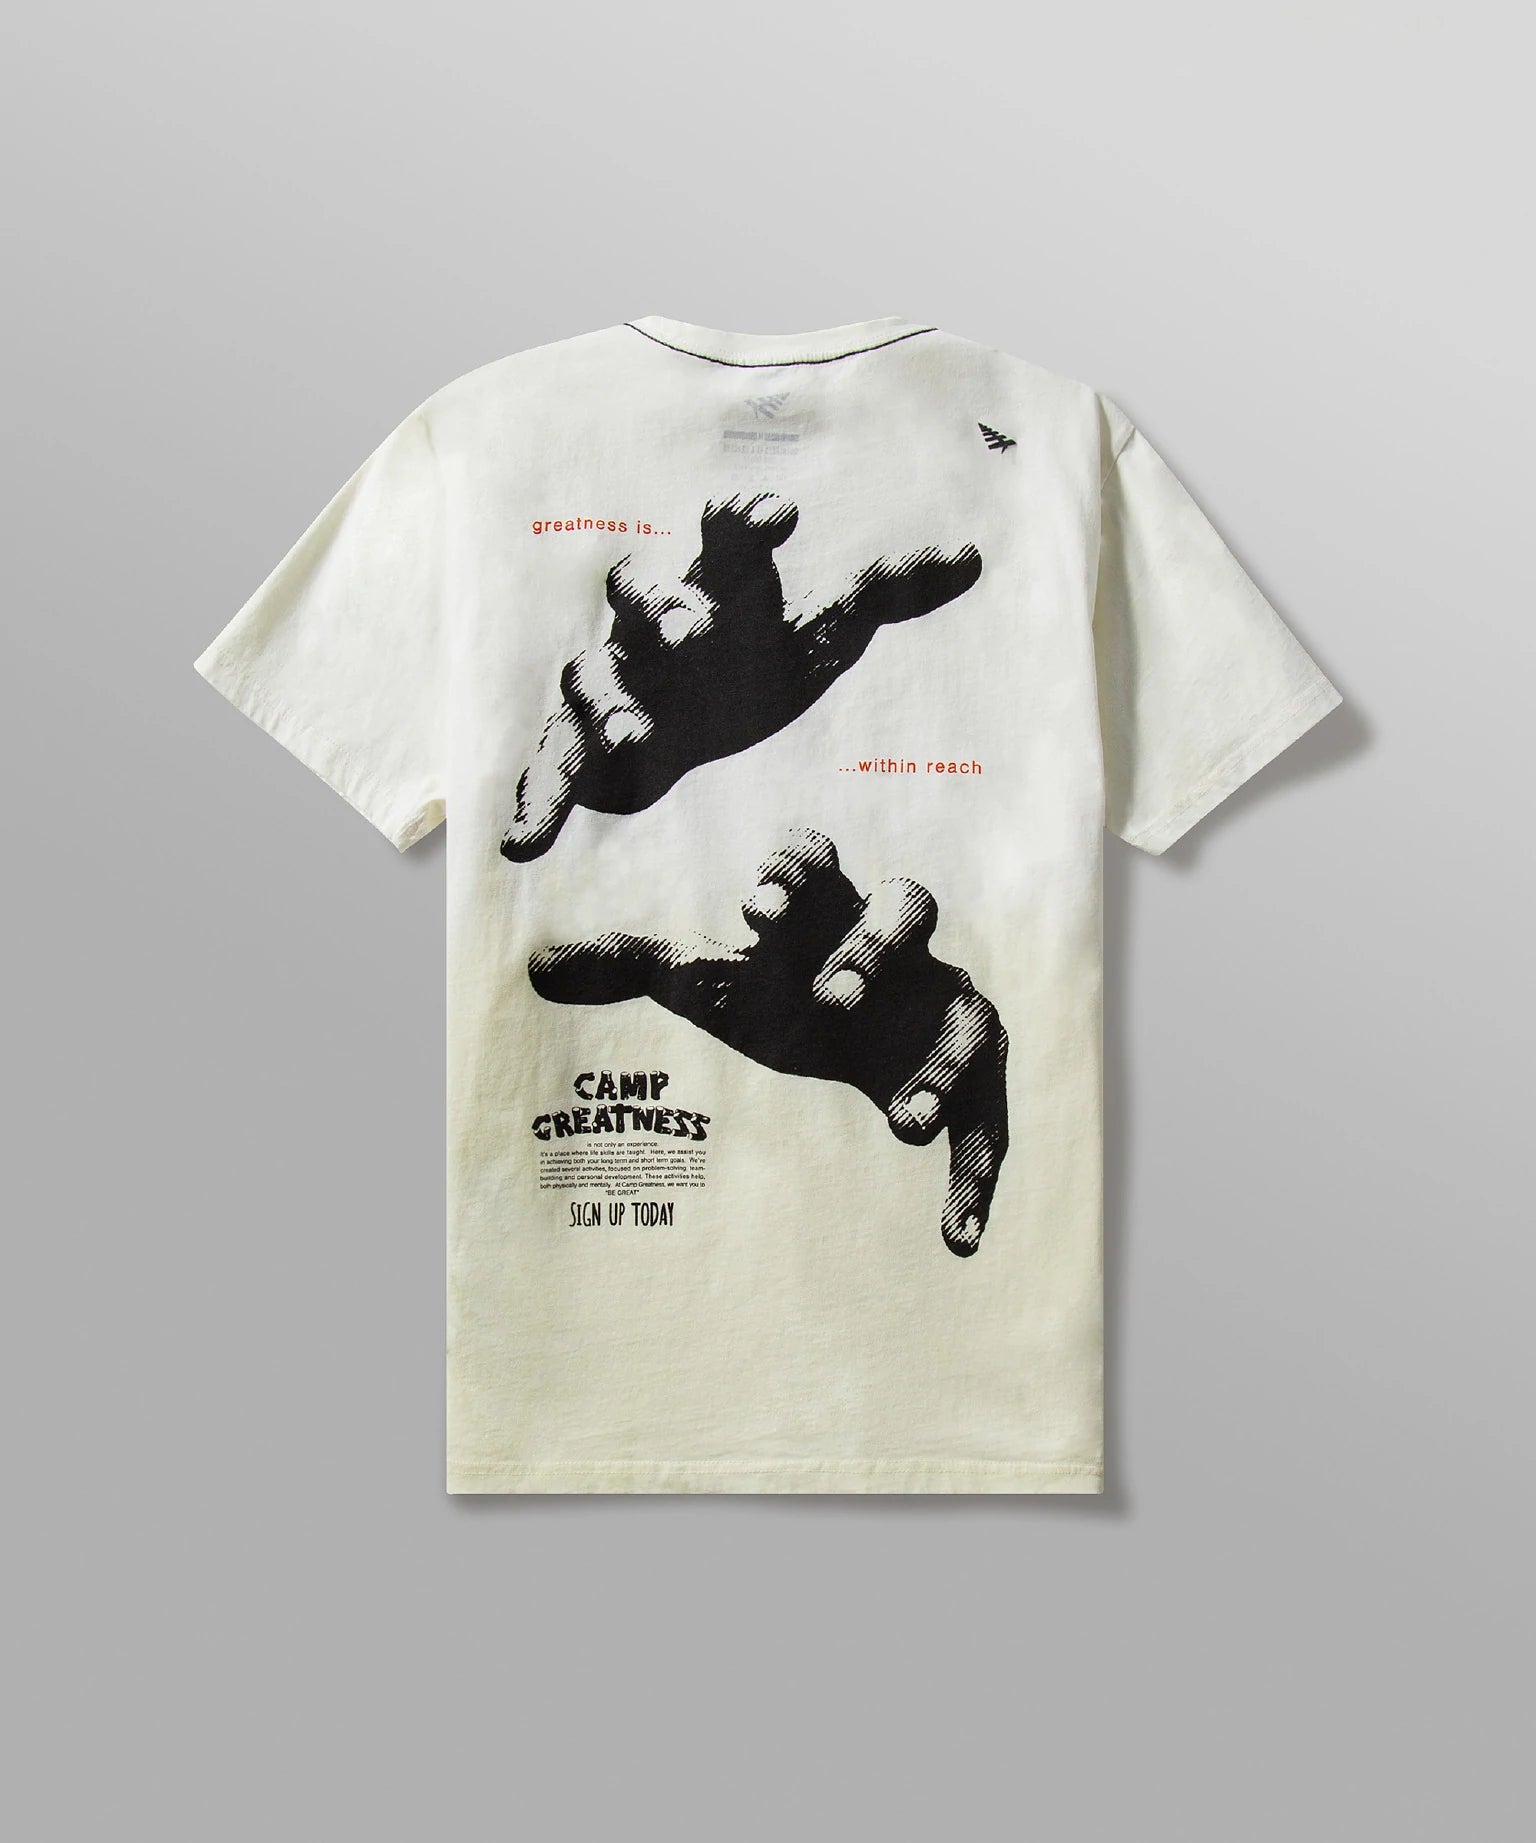 Ivory greatness within reach tee shirt